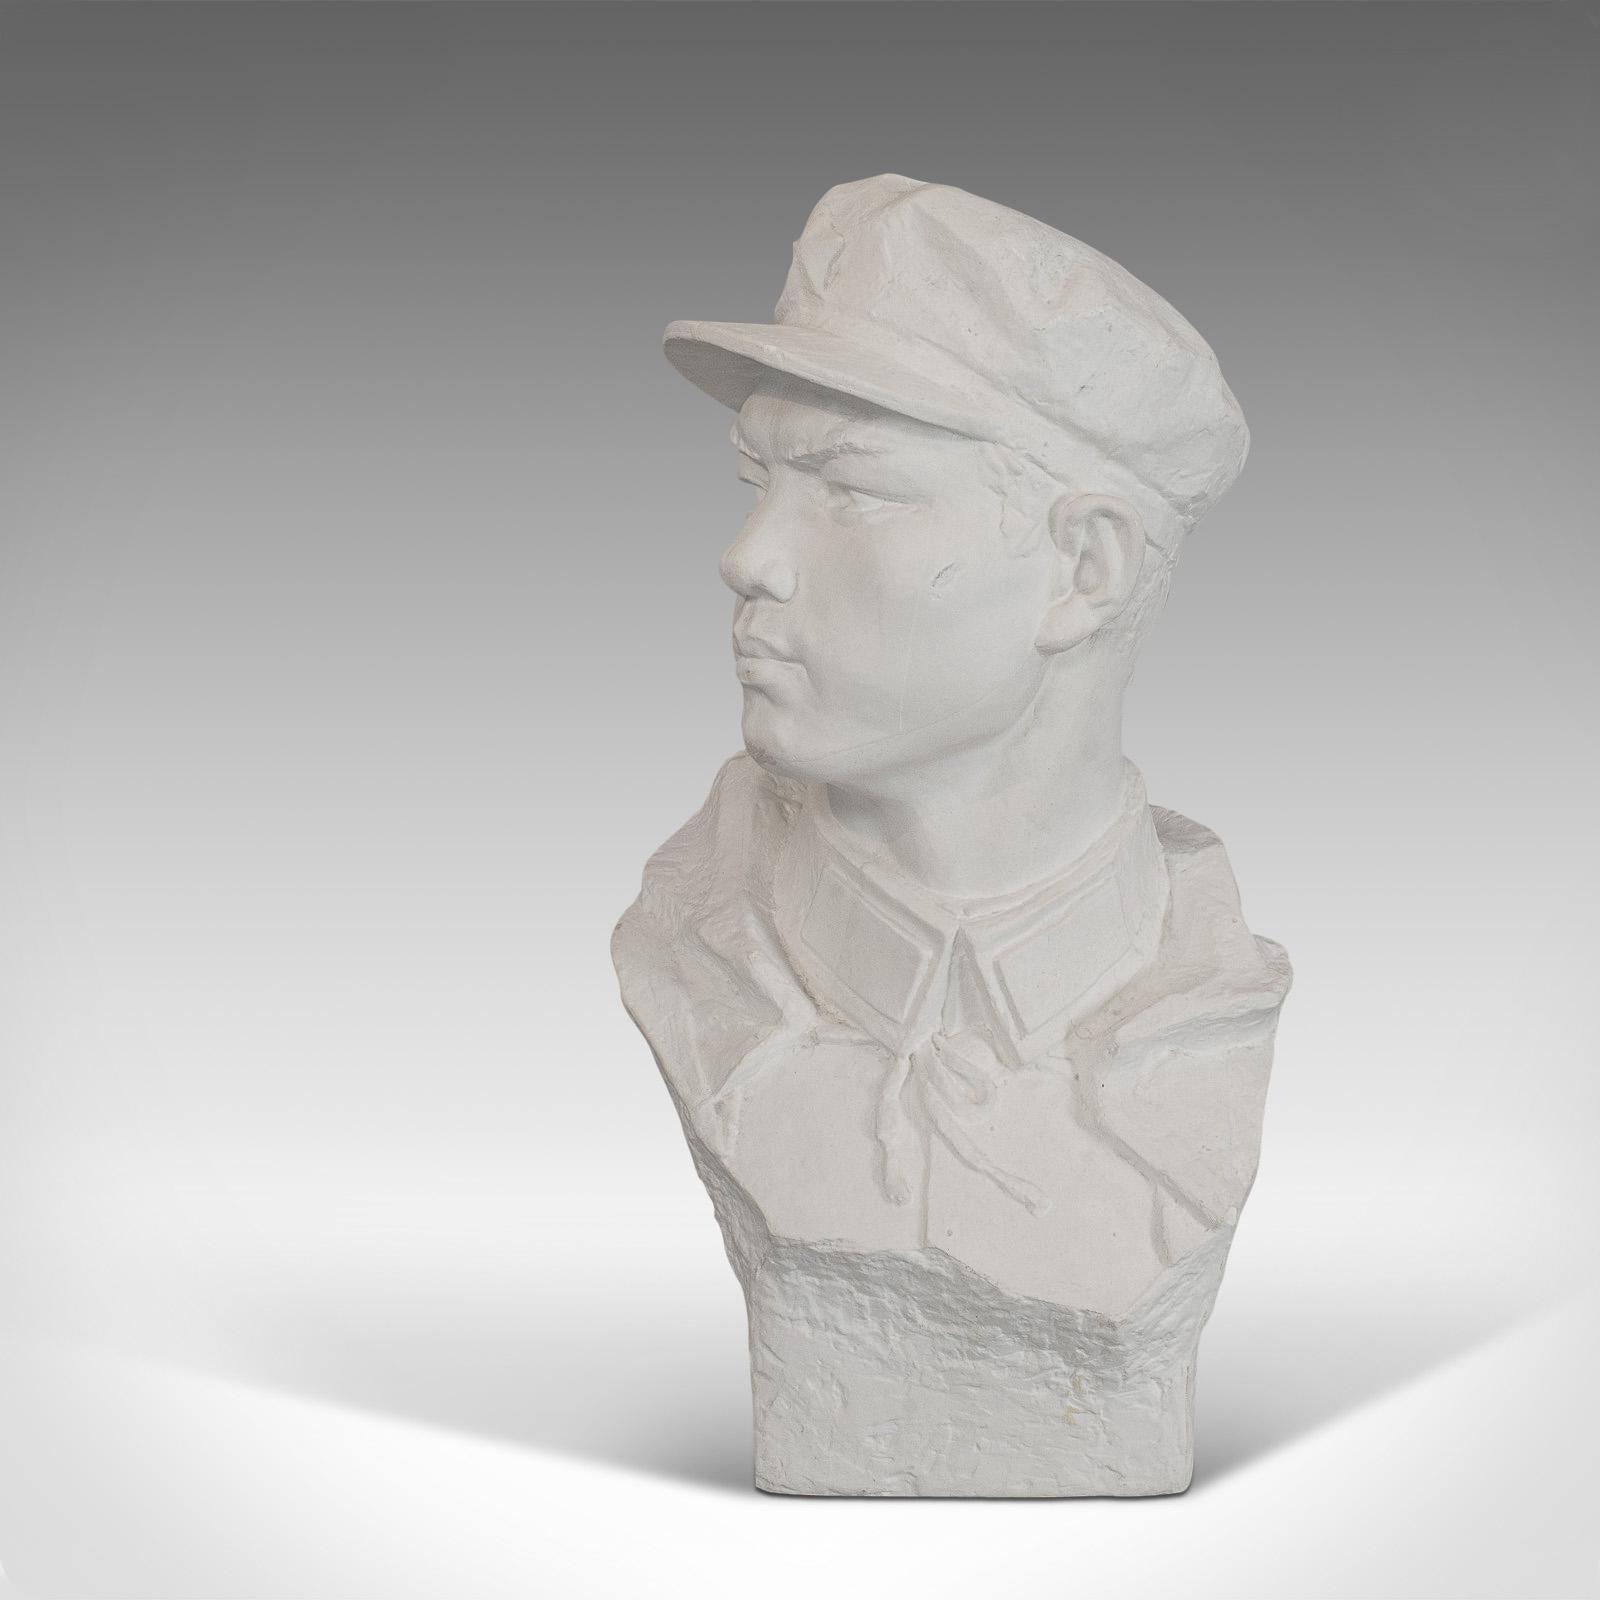 This is a vintage bust. An Oriental, plaster cast historical sculpture of Mao Zedong in official regalia, dating to the late 20th century.

Historic interest and appealing form
Displays a desirable aged patina - small mark to chin
Well-defined